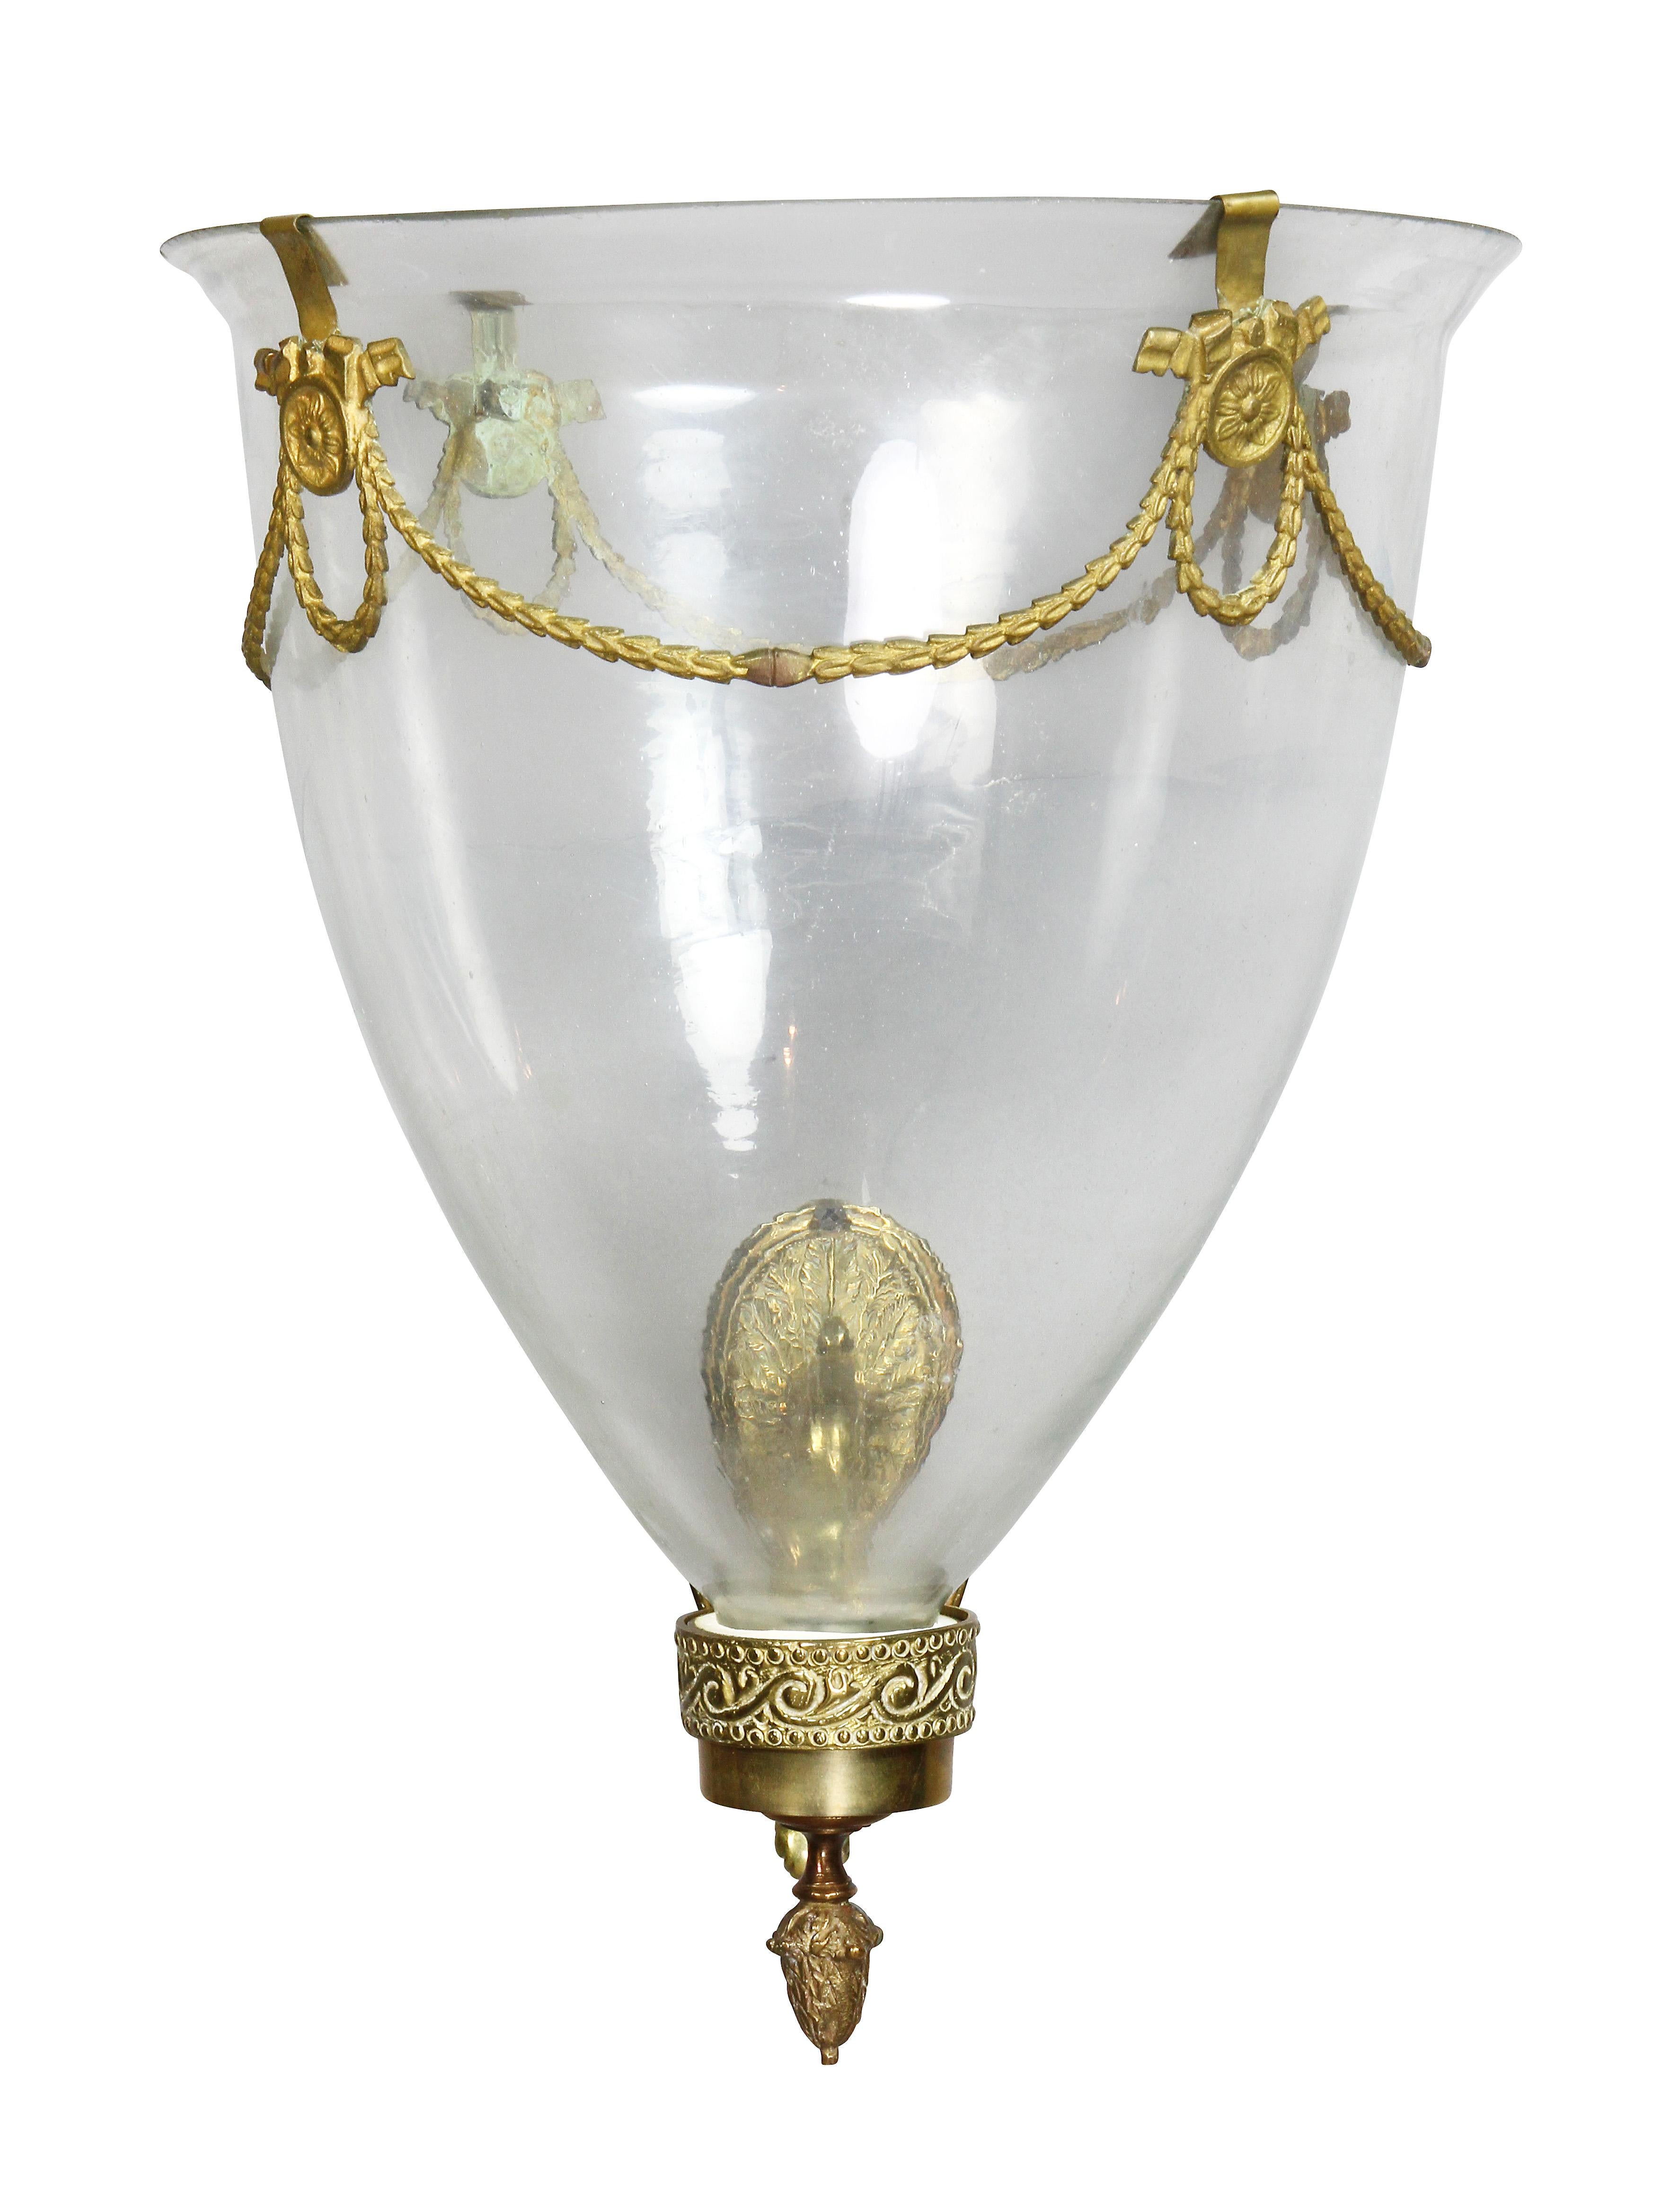 Conical with gilt metal swags, the shade with brass collar that fits tightly into the brass holder, scroll form wall bracket. One shade has a chip at top. William Hodgins Estate.